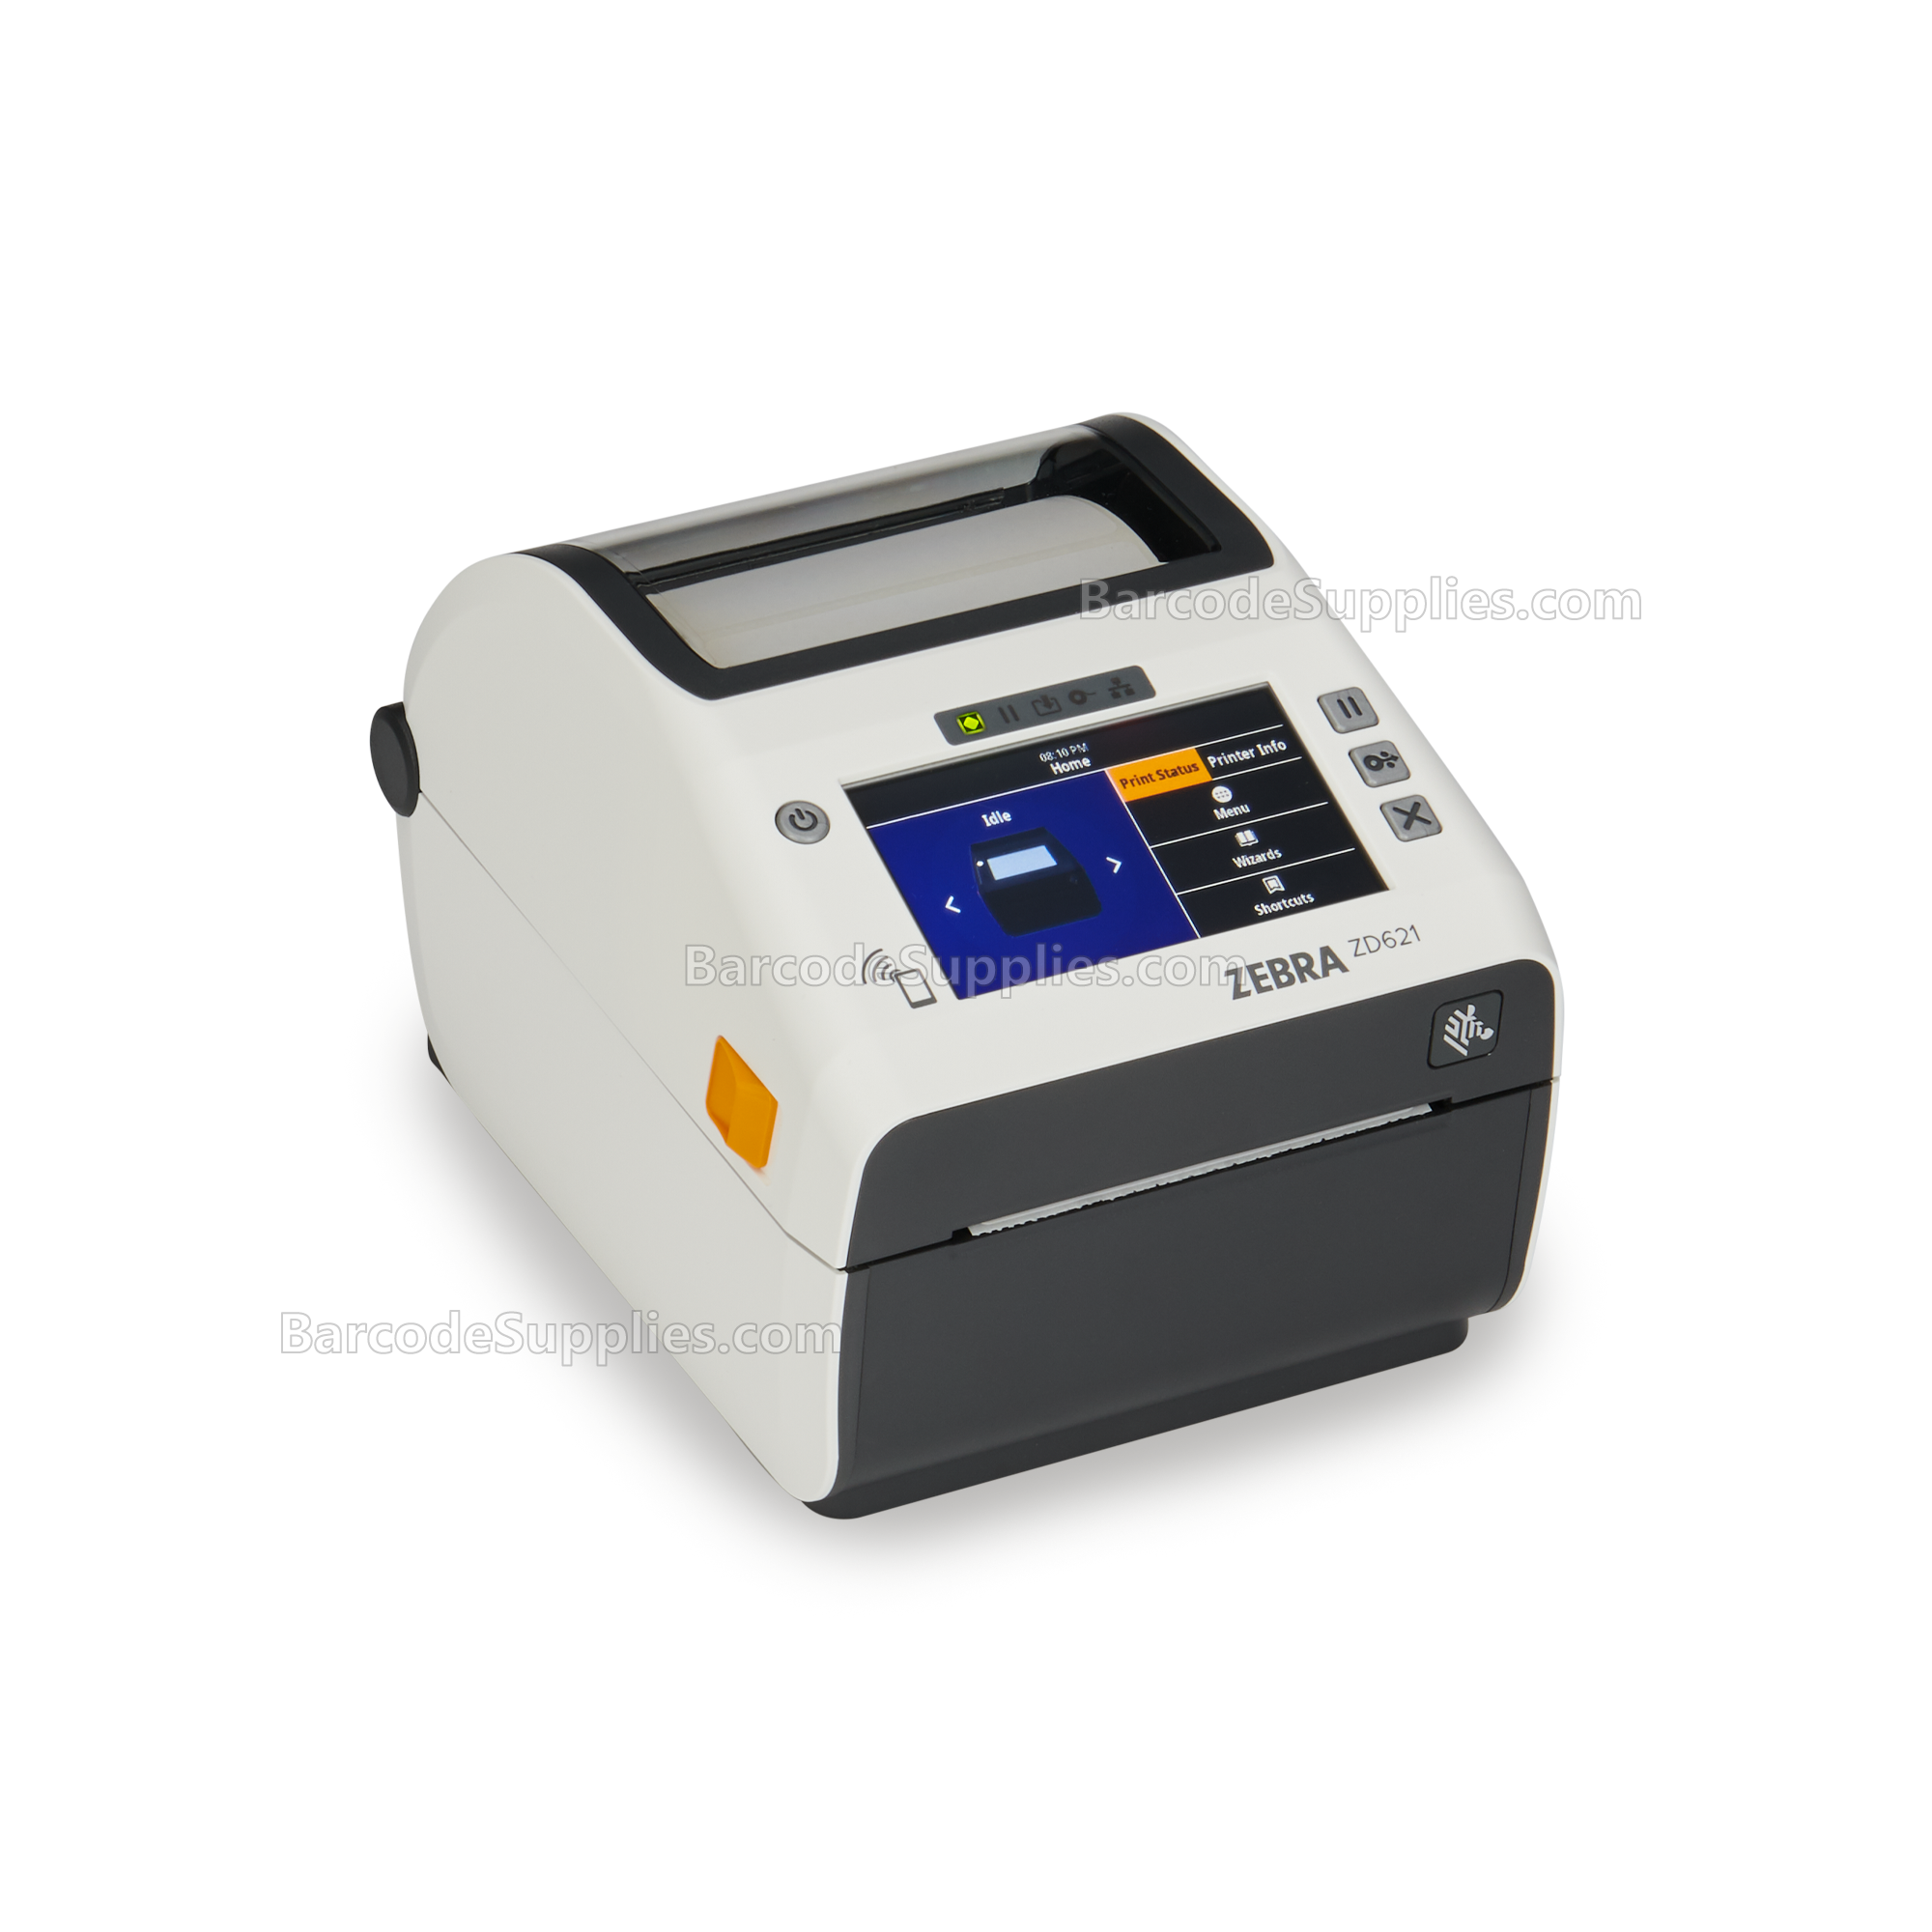 Zebra Direct Thermal Printer ZD621; Healthcare, Color Touch LCD; 203 dpi, USB, USB Host, Ethernet, Serial, 802.11ac, BT4, USA/Canada, US Cord, Swiss Font, EZPL